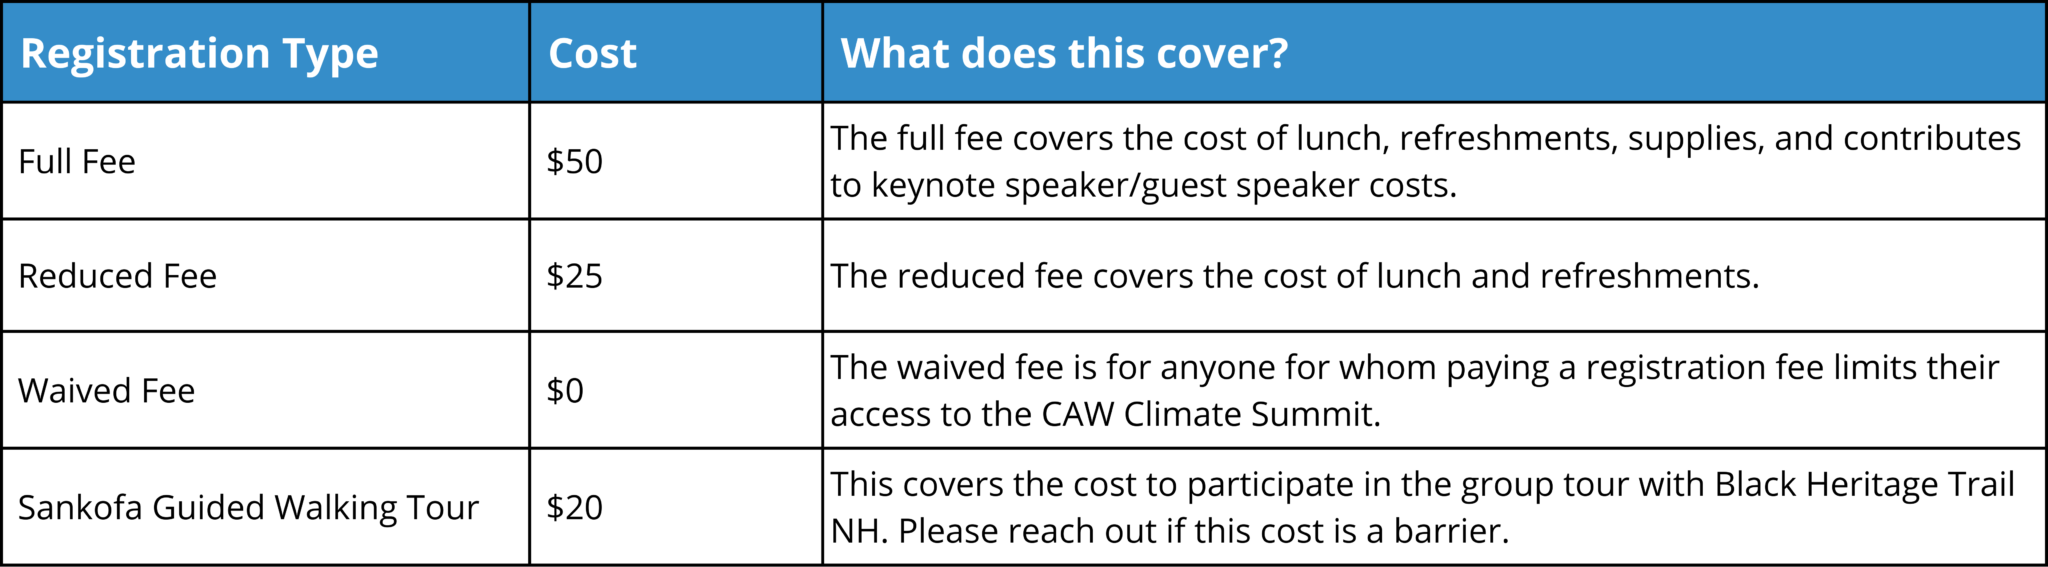 The image is a registration table that explains the different registration types, costs, and what is covered. The full fee is $50 and covers the cost of lunch, refreshments, supplies, and contributes to keynote speaker/guest speaker costs. The reduced fee is $25 and covers the cost of lunch and refreshments. The waived fee is $0 and is for anyone for whom paying a registration fee limits their access to the CAW Climate Summit. The Sankofa Guided Walking Tour is $20 and covers the cost to participate in the group with with Black Heritage Trail NH.